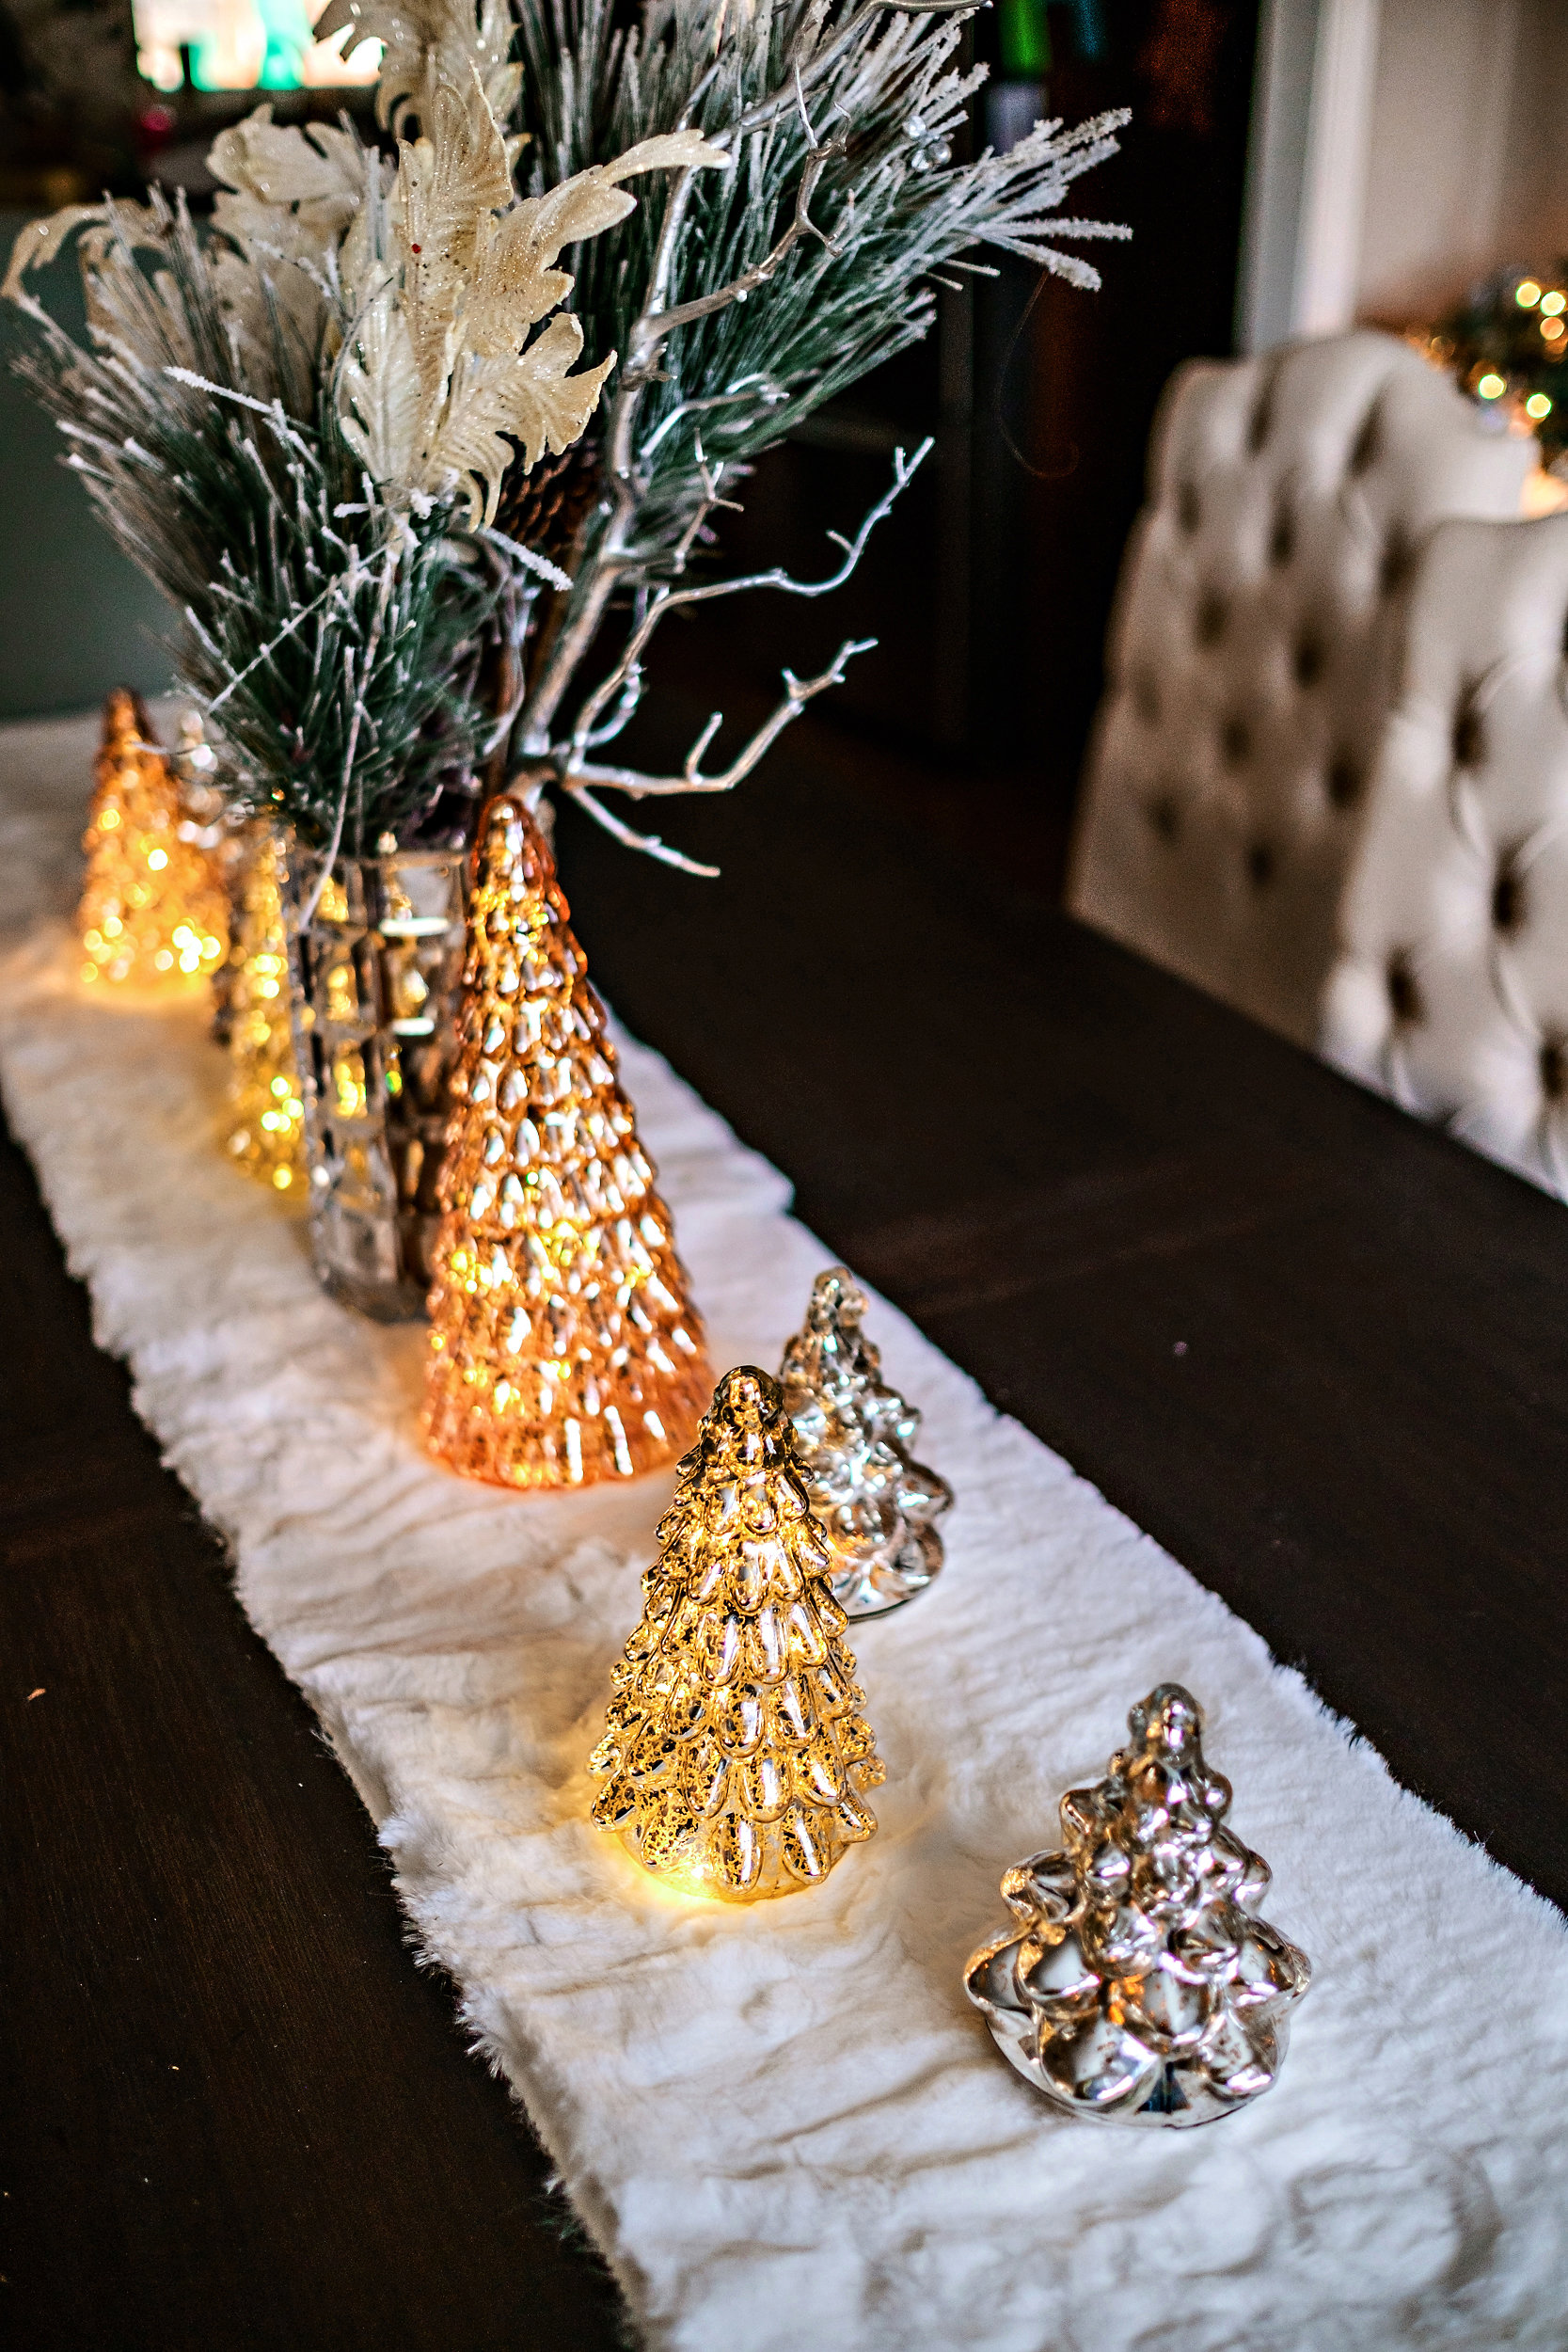 Looking for the best Christmas decor? Popular Atlanta Blogger Happily Hughes is sharing her favorite Christmas decor with Wayfair. Click to see it HERE!